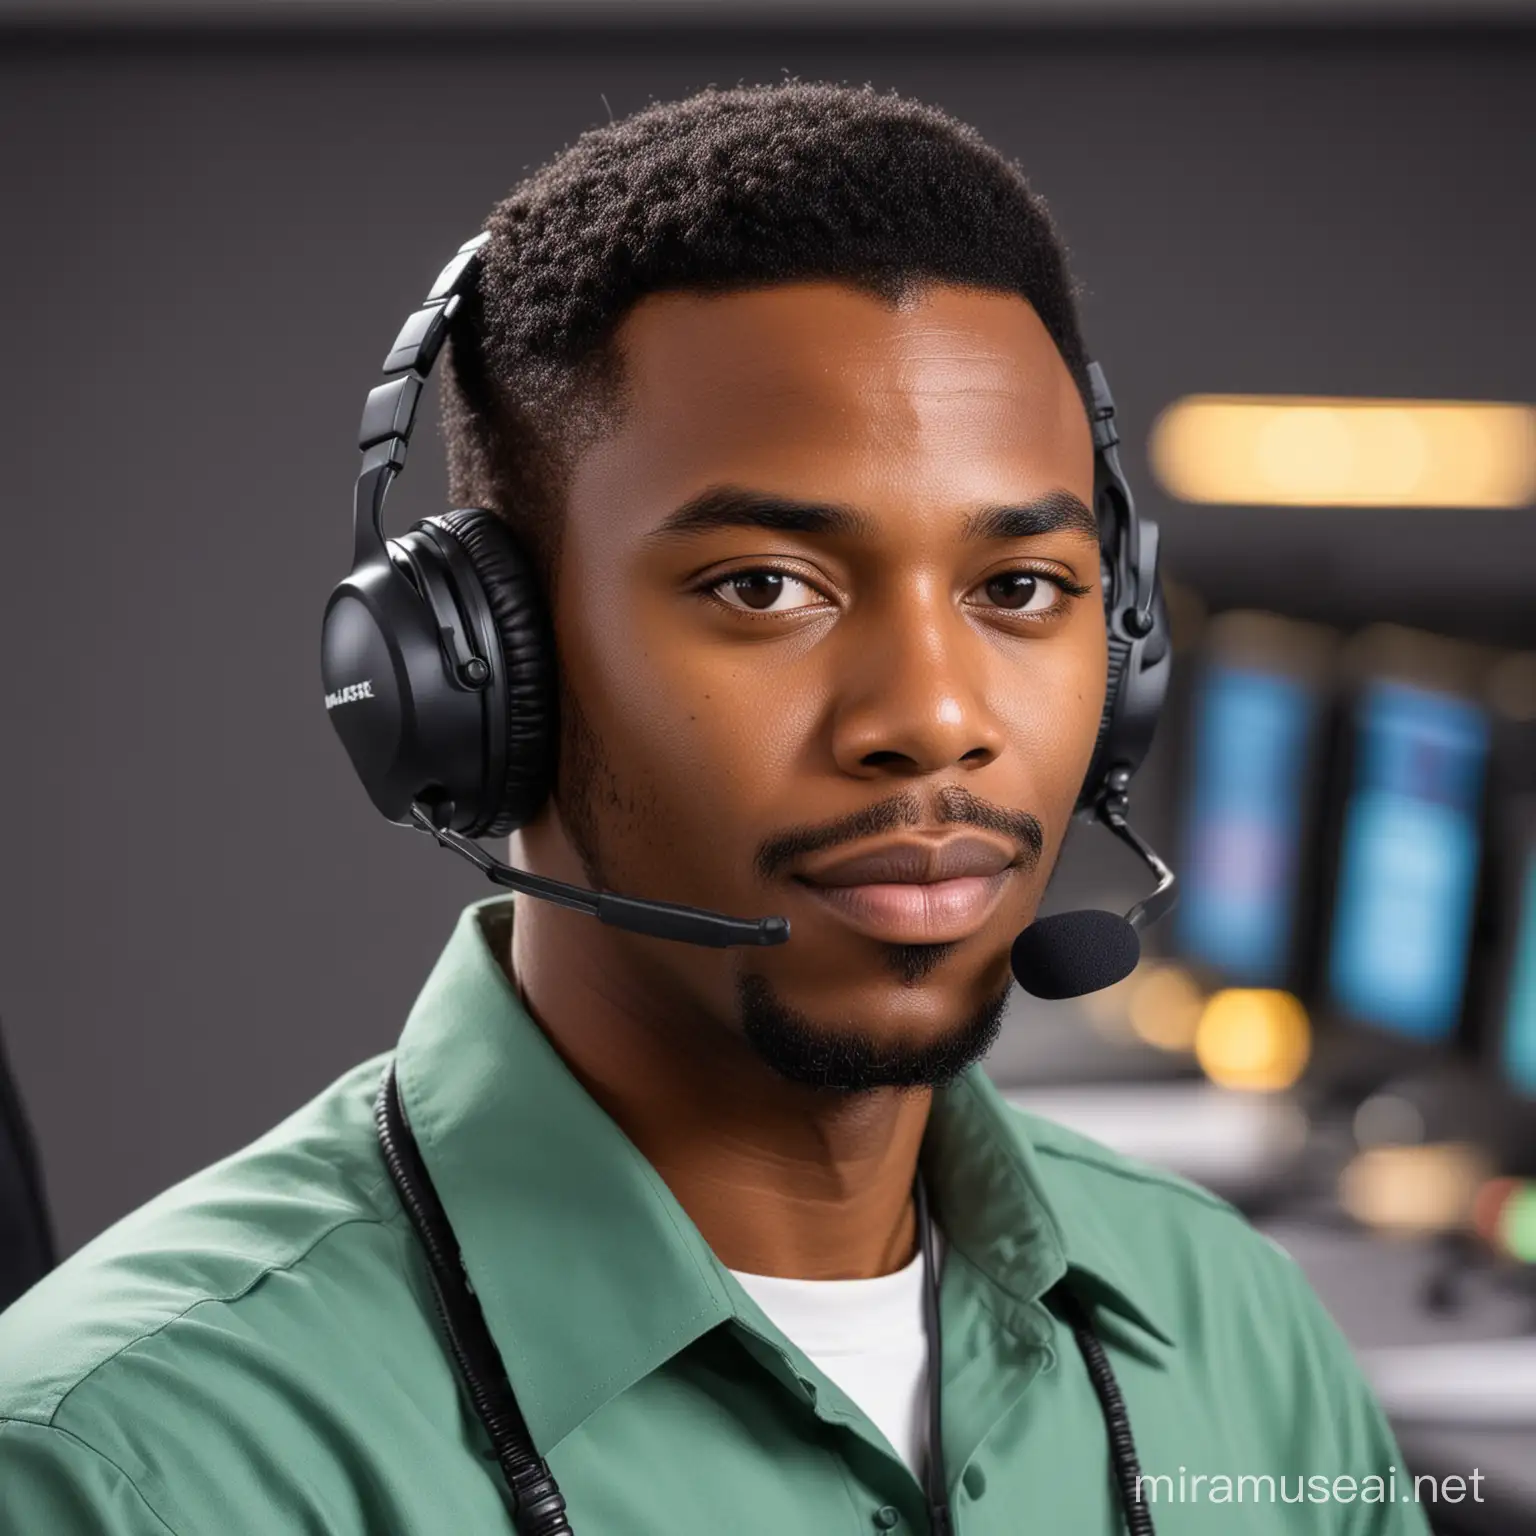 Black Male Air Traffic Controller Wearing Headset in Control Tower